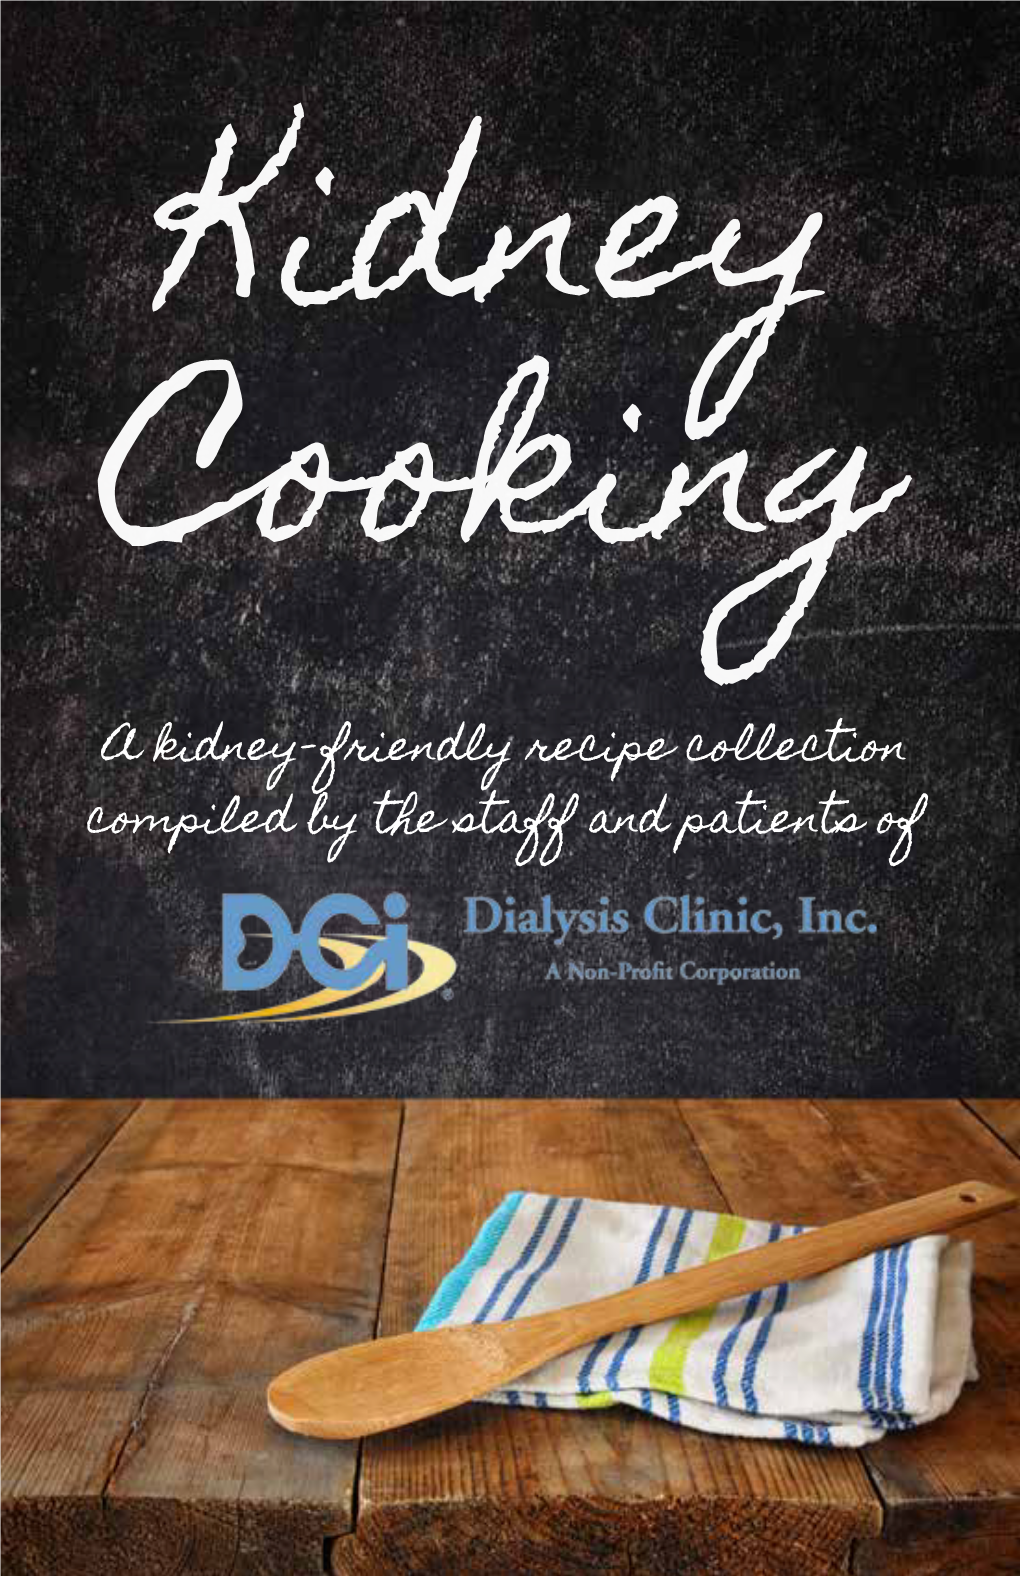 A Kidney - Friendly Recipe Collection Compiled by the Staff and Patients of INTRODUCTION